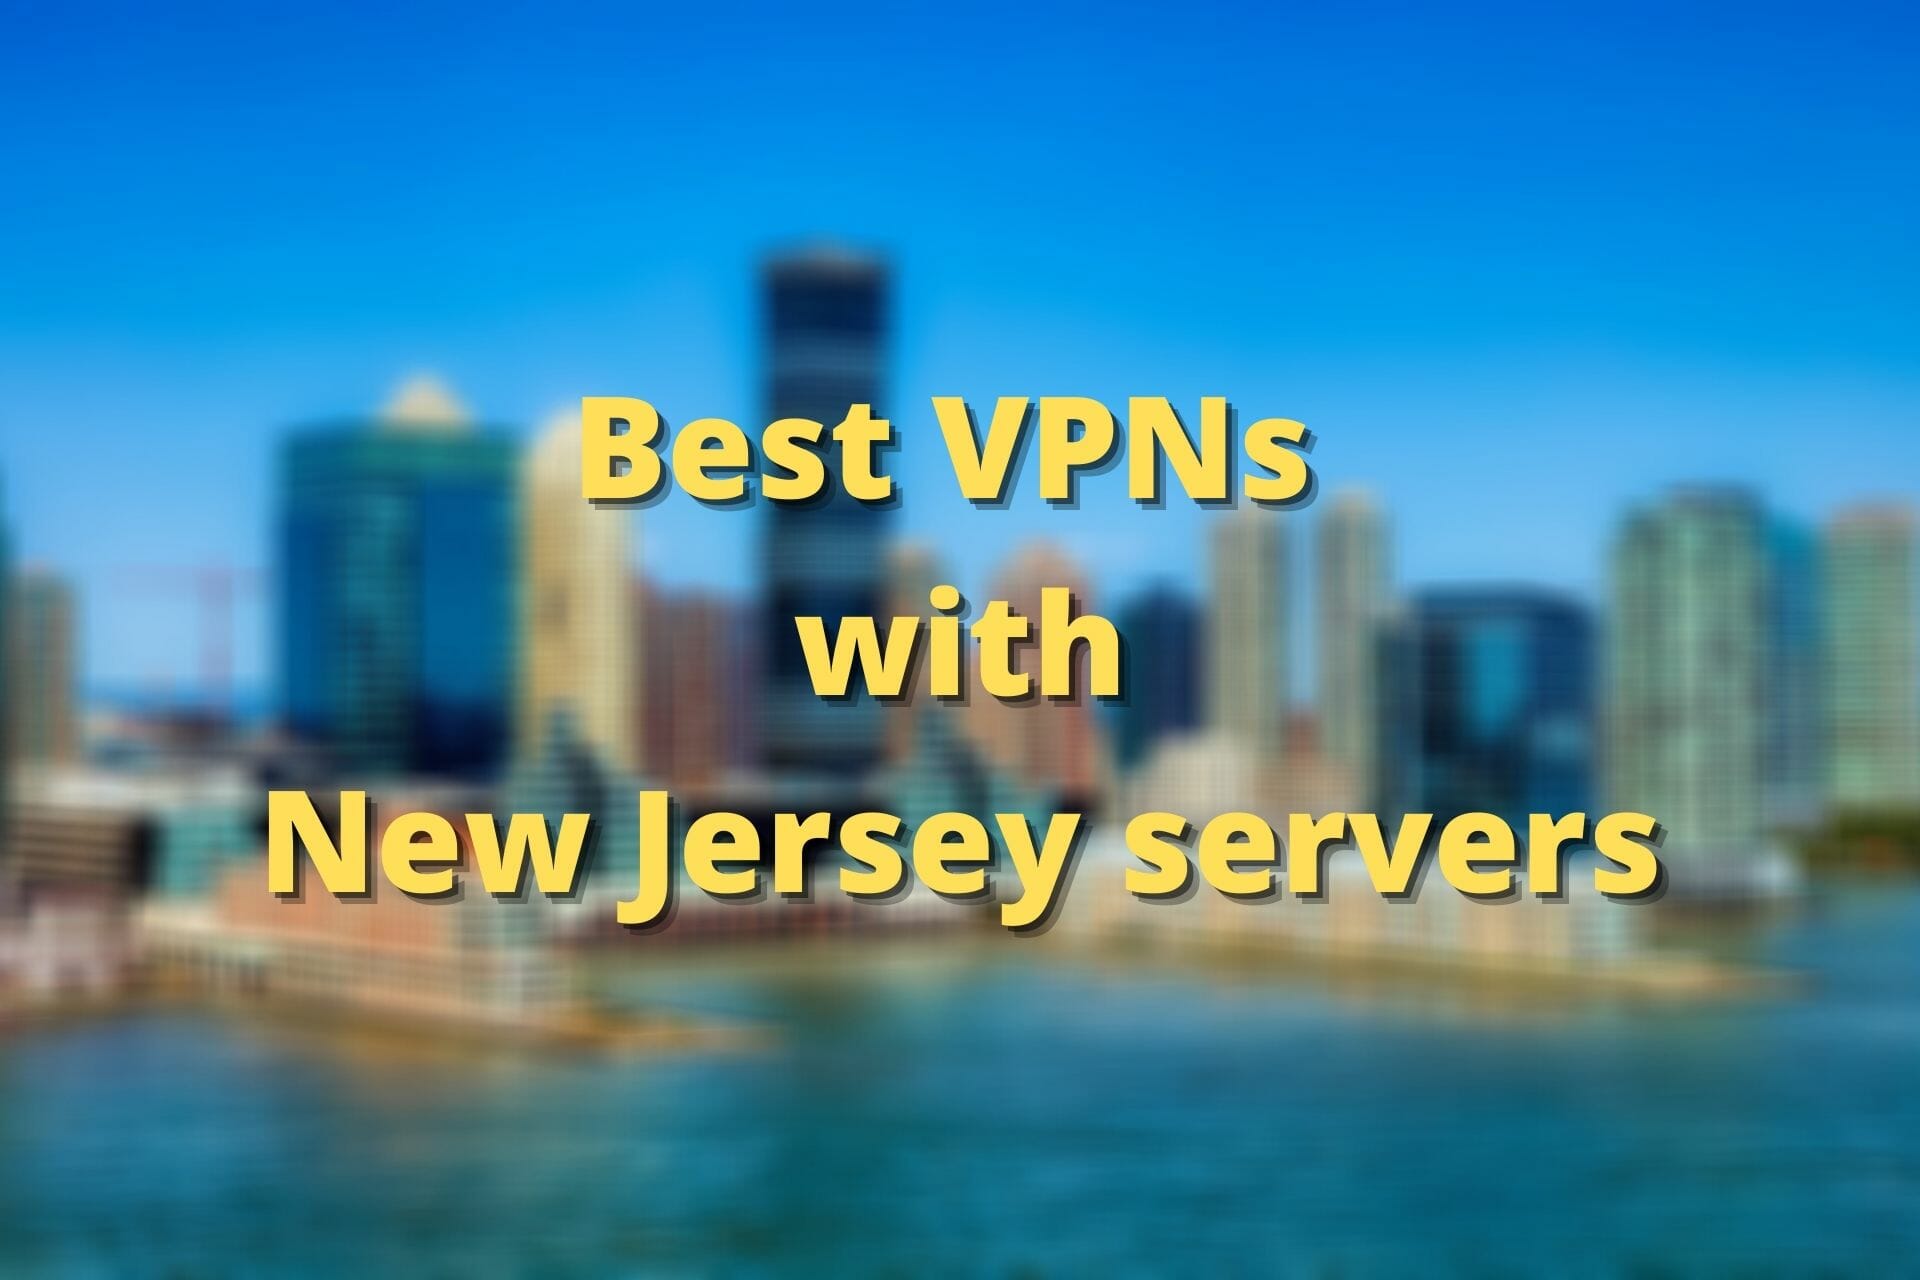 Best VPNs with New Jersey servers